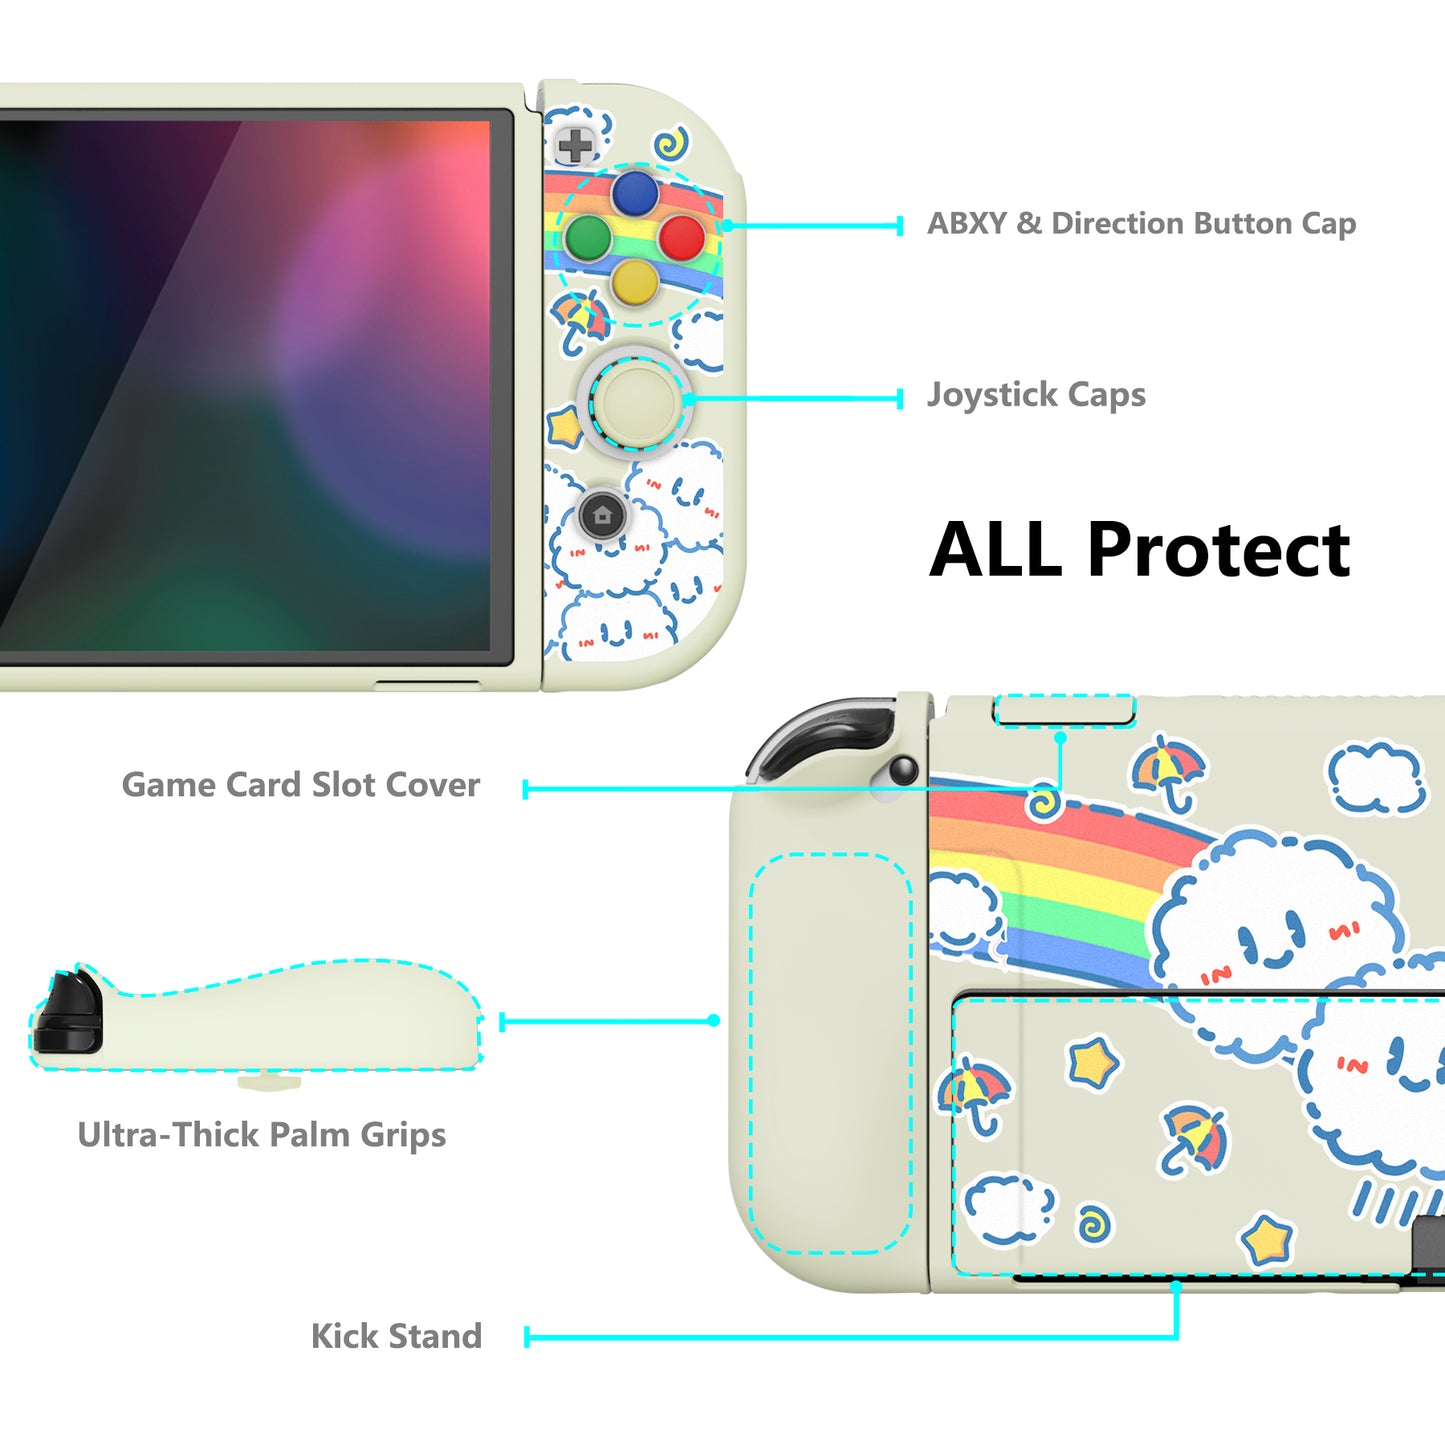 PlayVital ZealProtect Soft Protective Case for Switch OLED, Flexible Protector Joycon Grip Cover for Switch OLED with Thumb Grip Caps & ABXY Direction Button Caps - Rainbow on Cloud - XSOYV6016 playvital